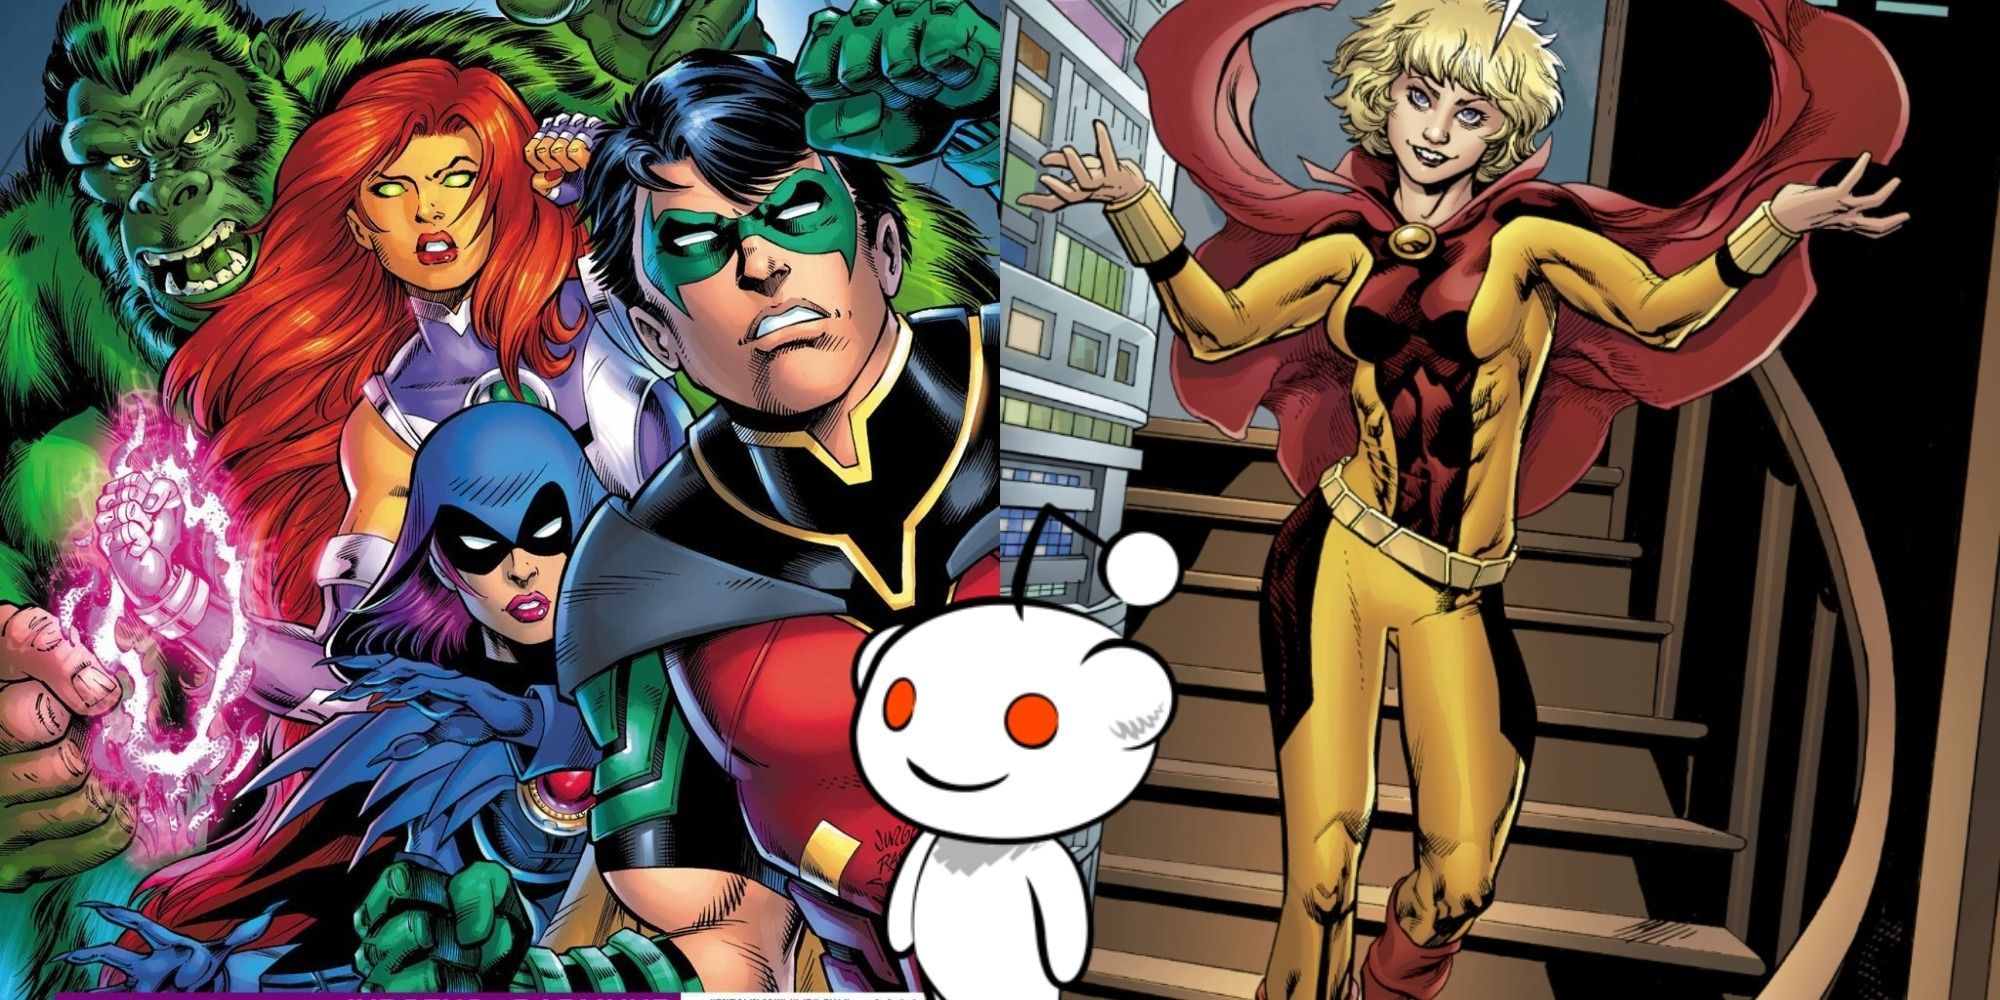 8 Unpopular Opinions About The Teen Titans According To Reddit